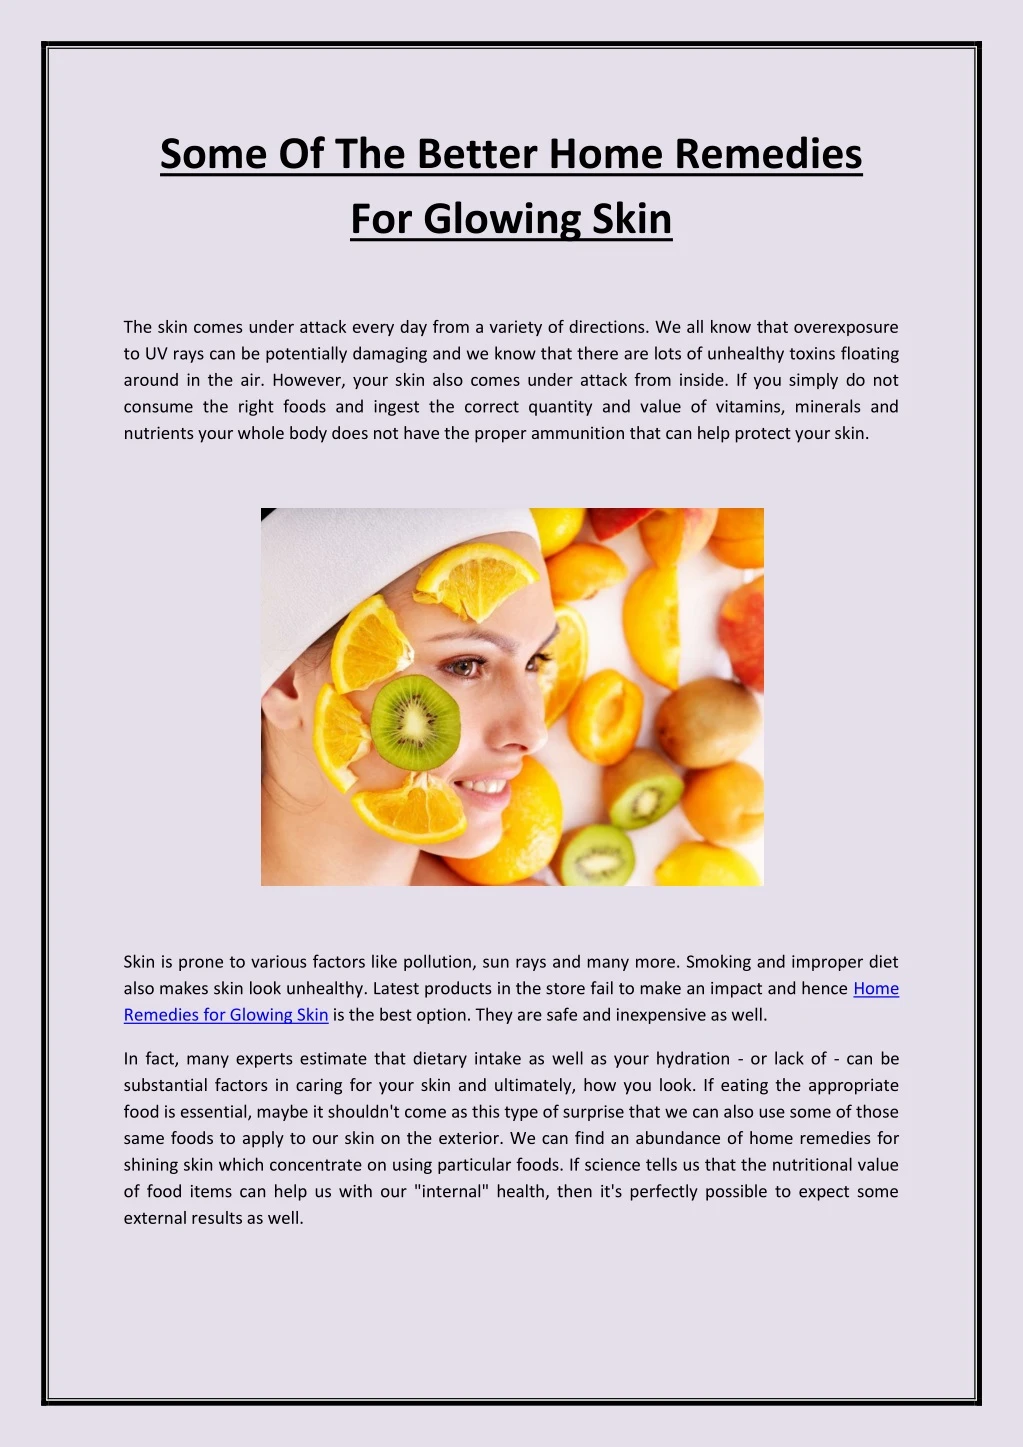 some of the better home remedies for glowing skin